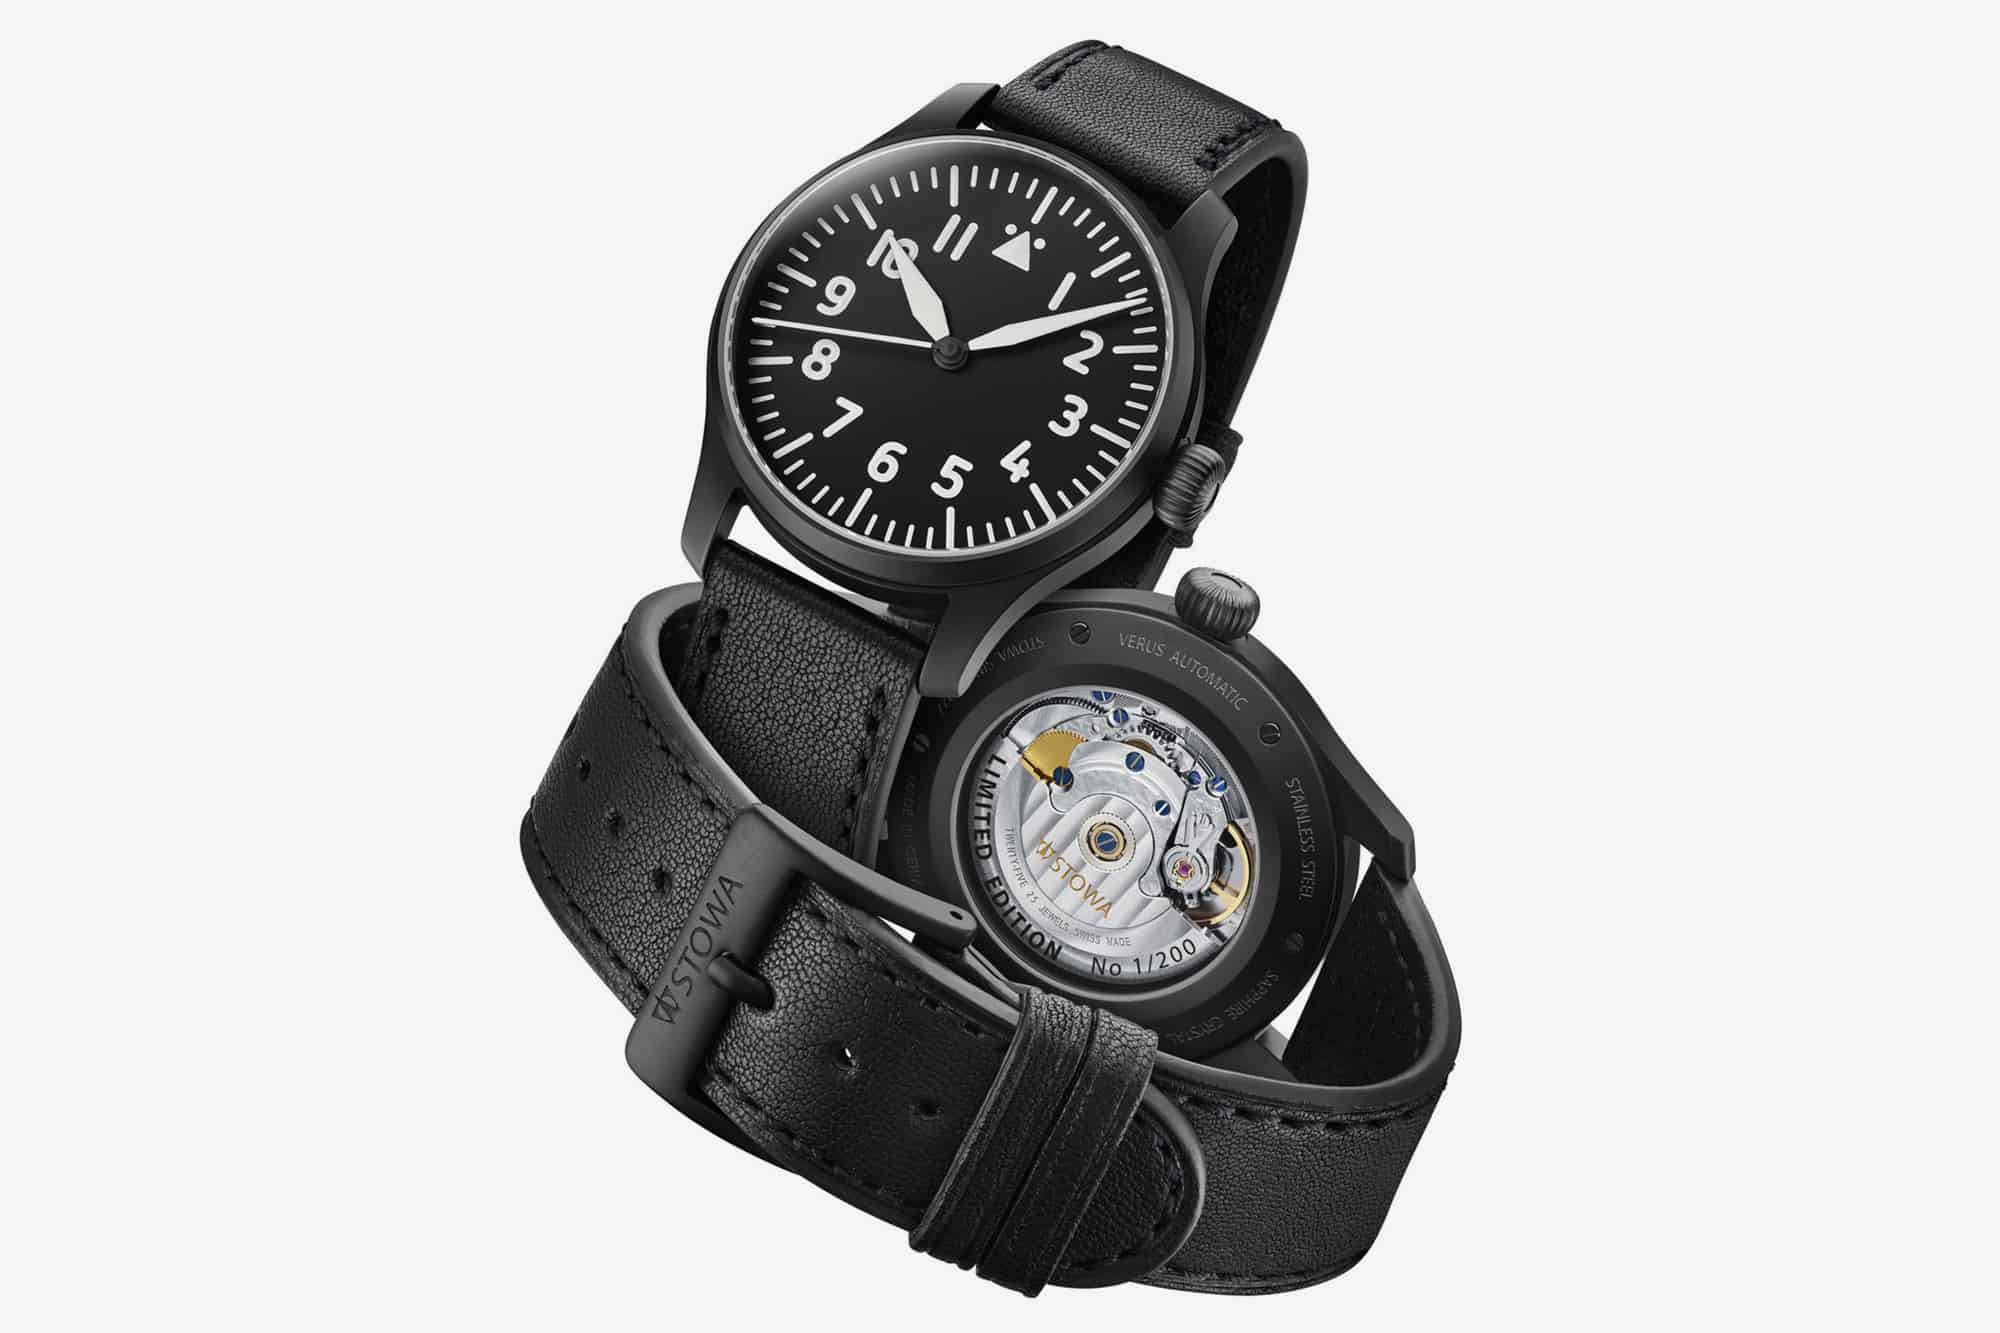 Introducing the Stowa Flieger Verus and Antea 1919 Black Forest Editions